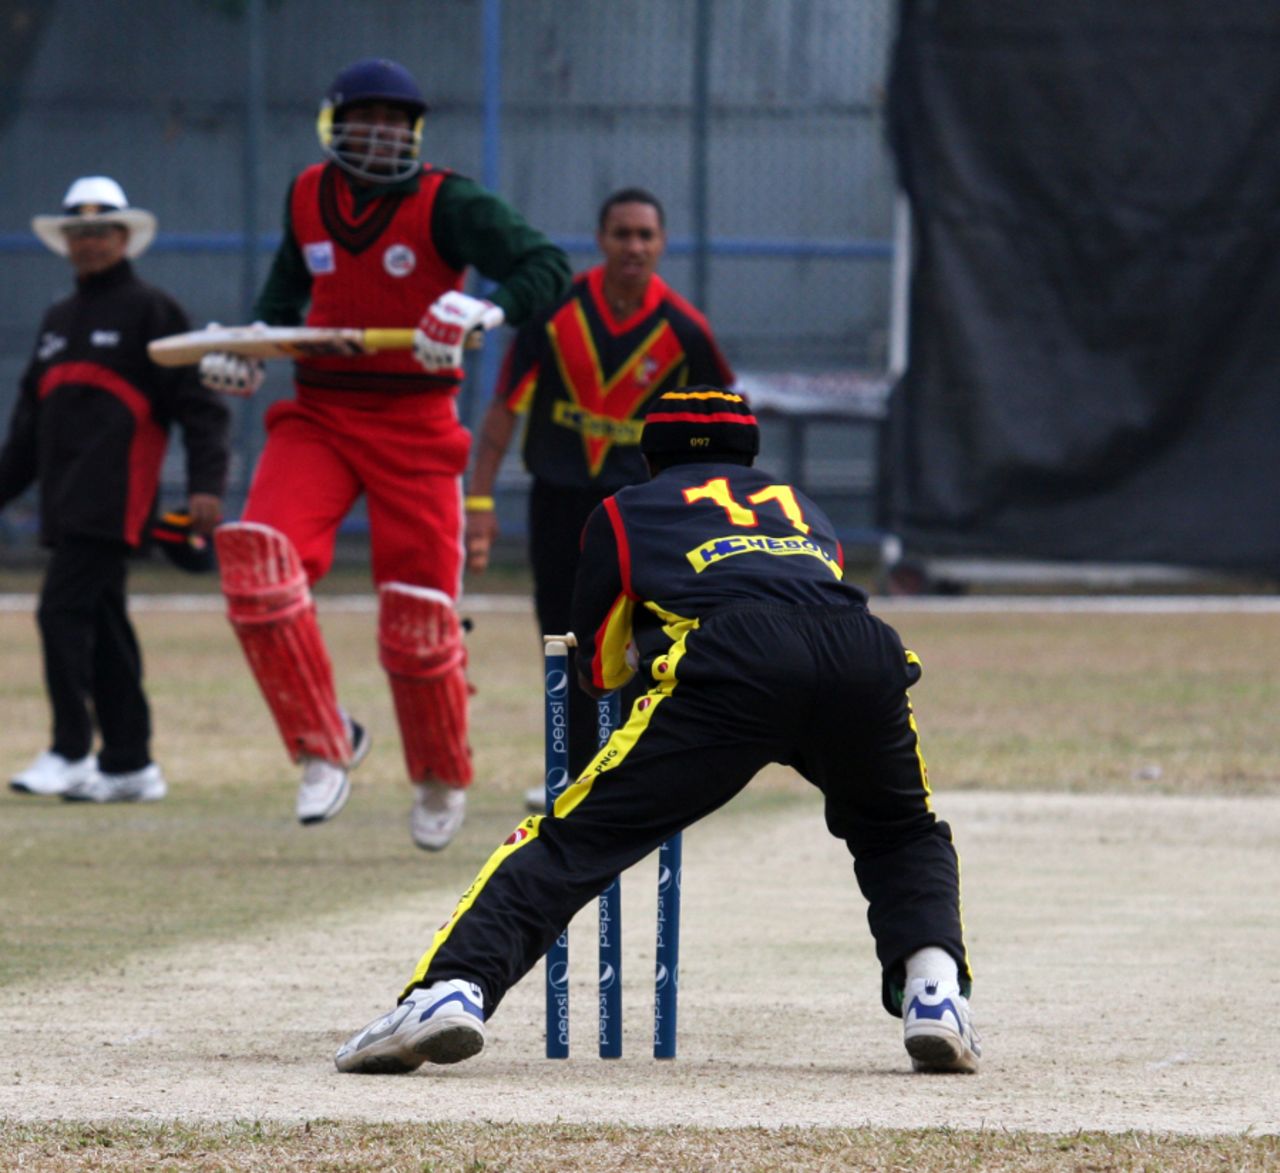 Papua New Guinea wicketkeeper Jack Vare completes a run out, Oman v Papua New Guinea, WCL Division Three, Mong Kok, January 22, 2011